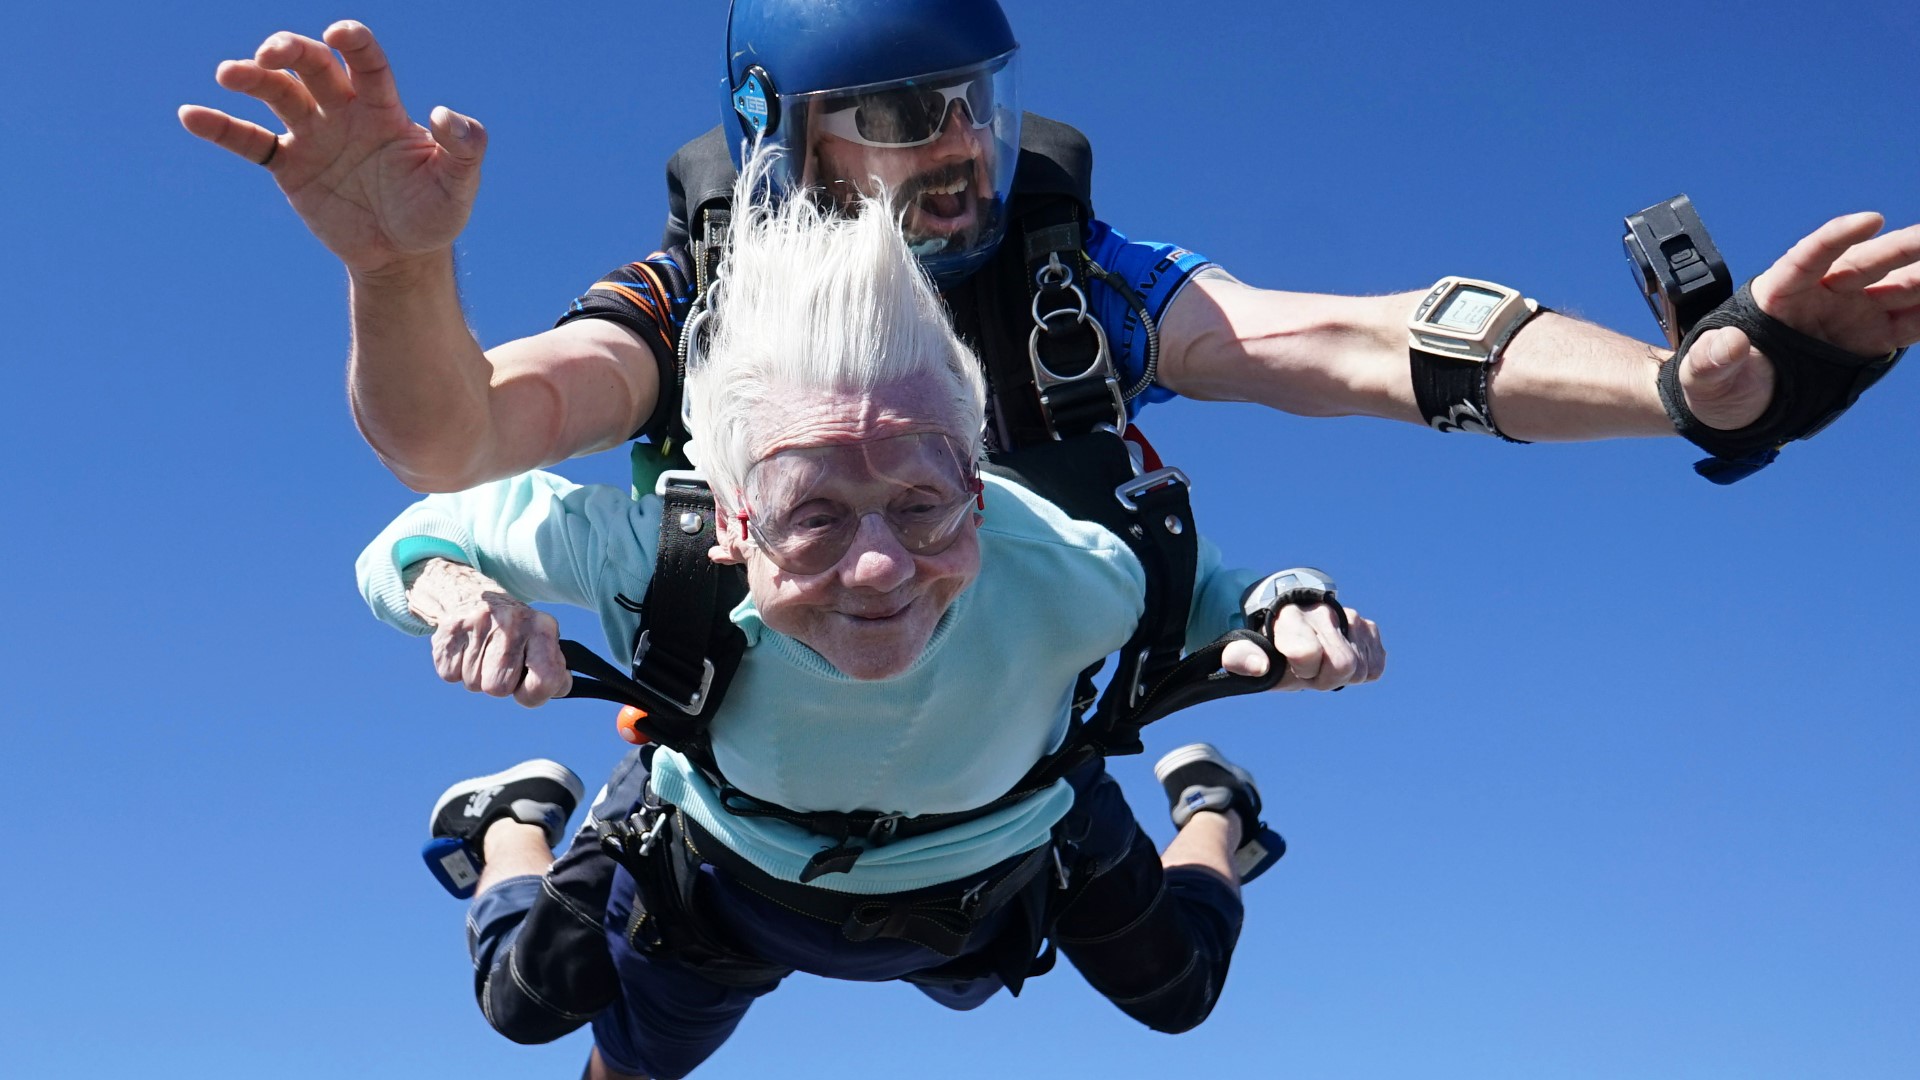 104-year-old Chicago woman skydives from plane, aiming for record ...